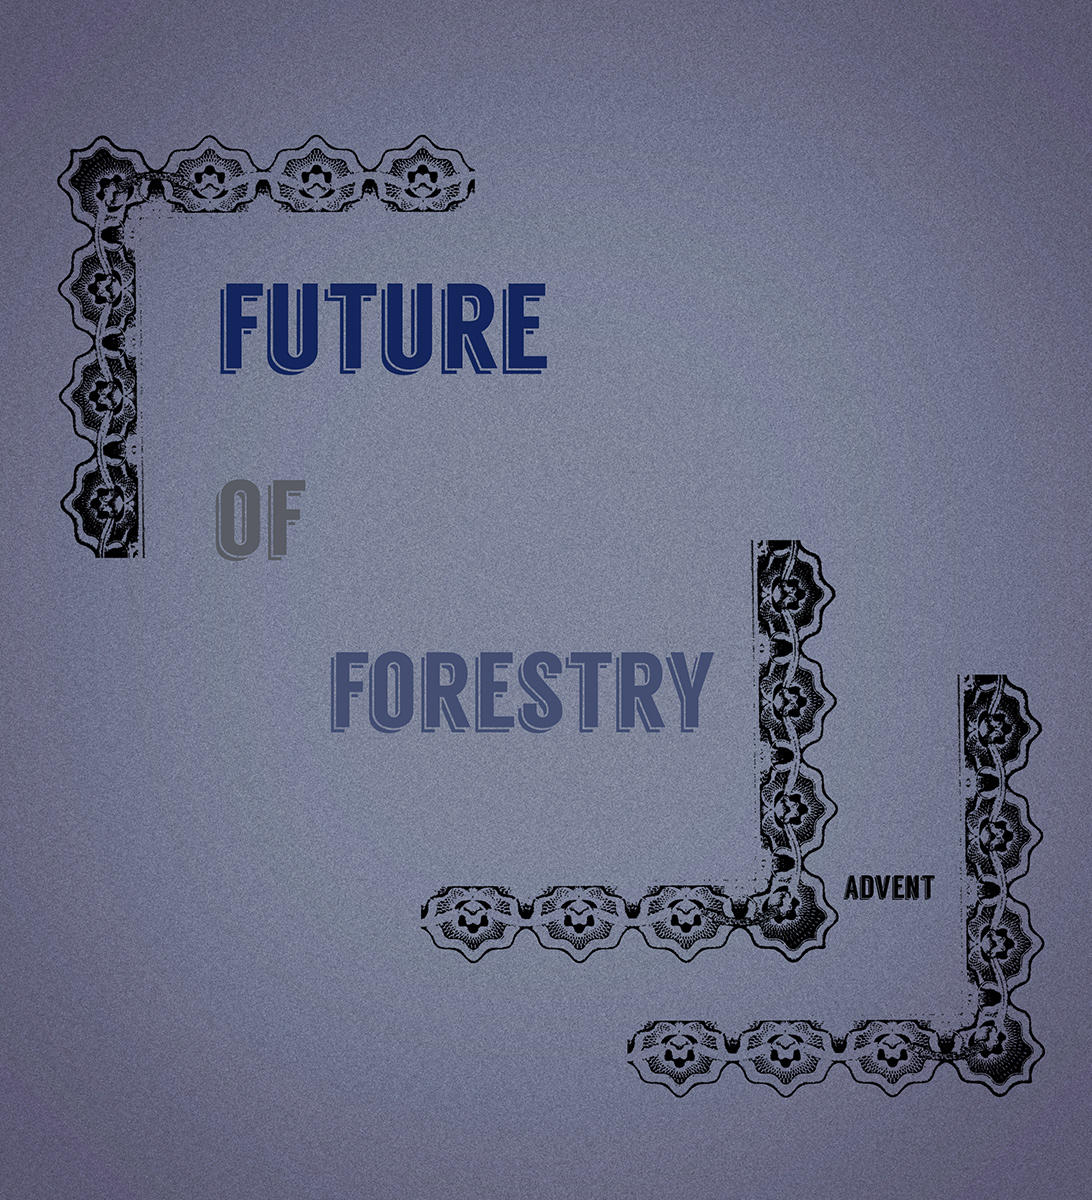 Future of Forestry type text poster design Christmas holidays Album sounds Christian rock band art print media